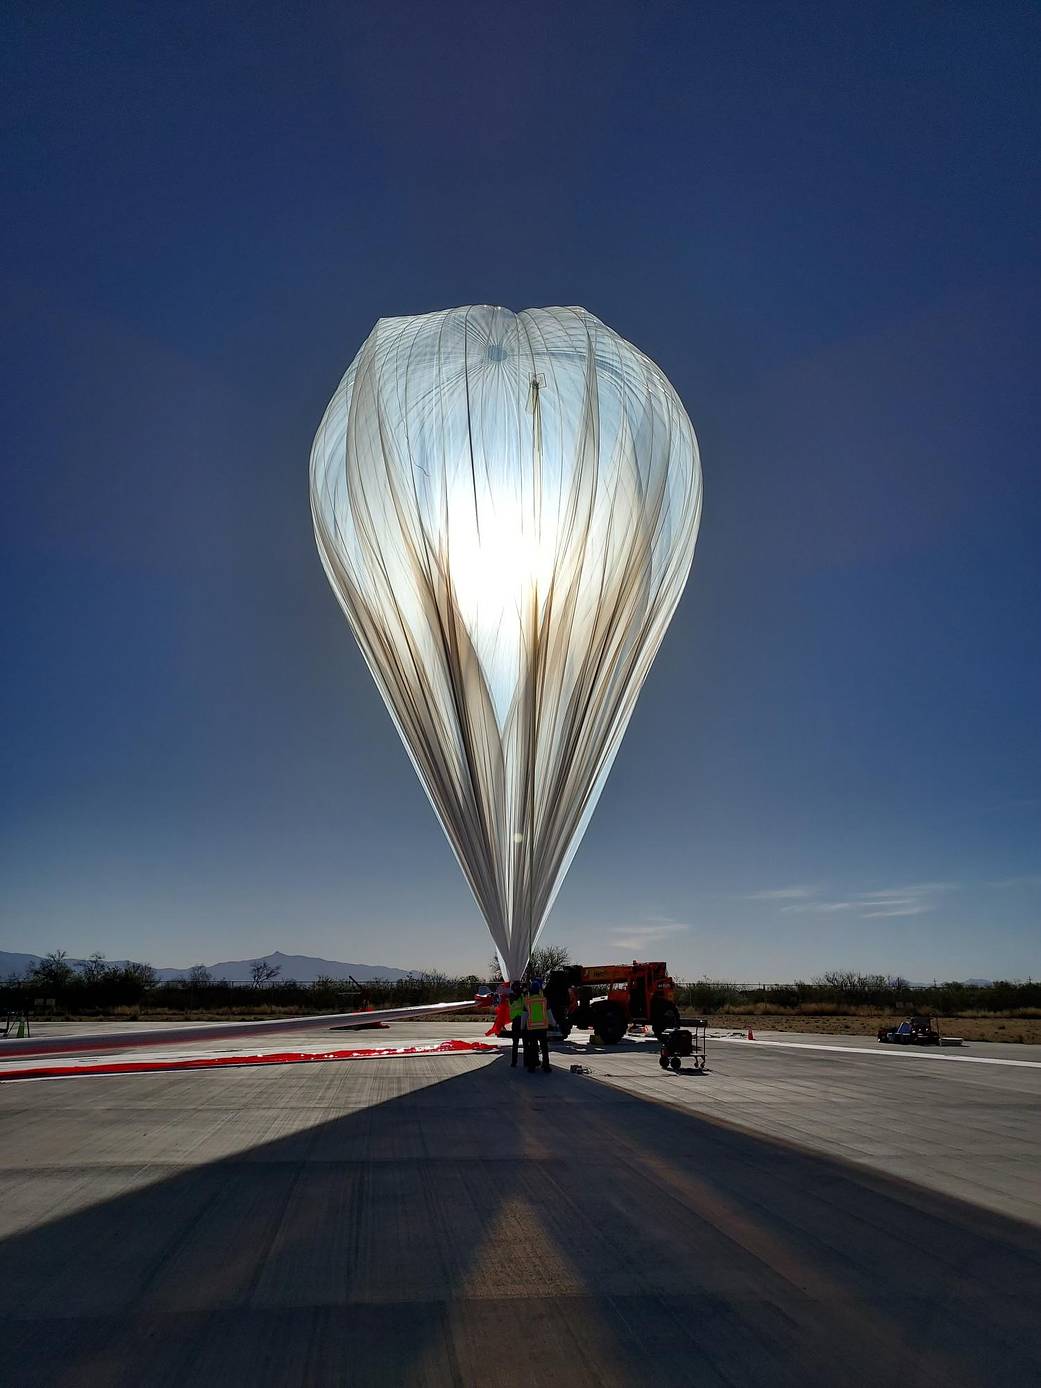 World View’s Stratollite high-altitude balloon is inflated on the launch pad.